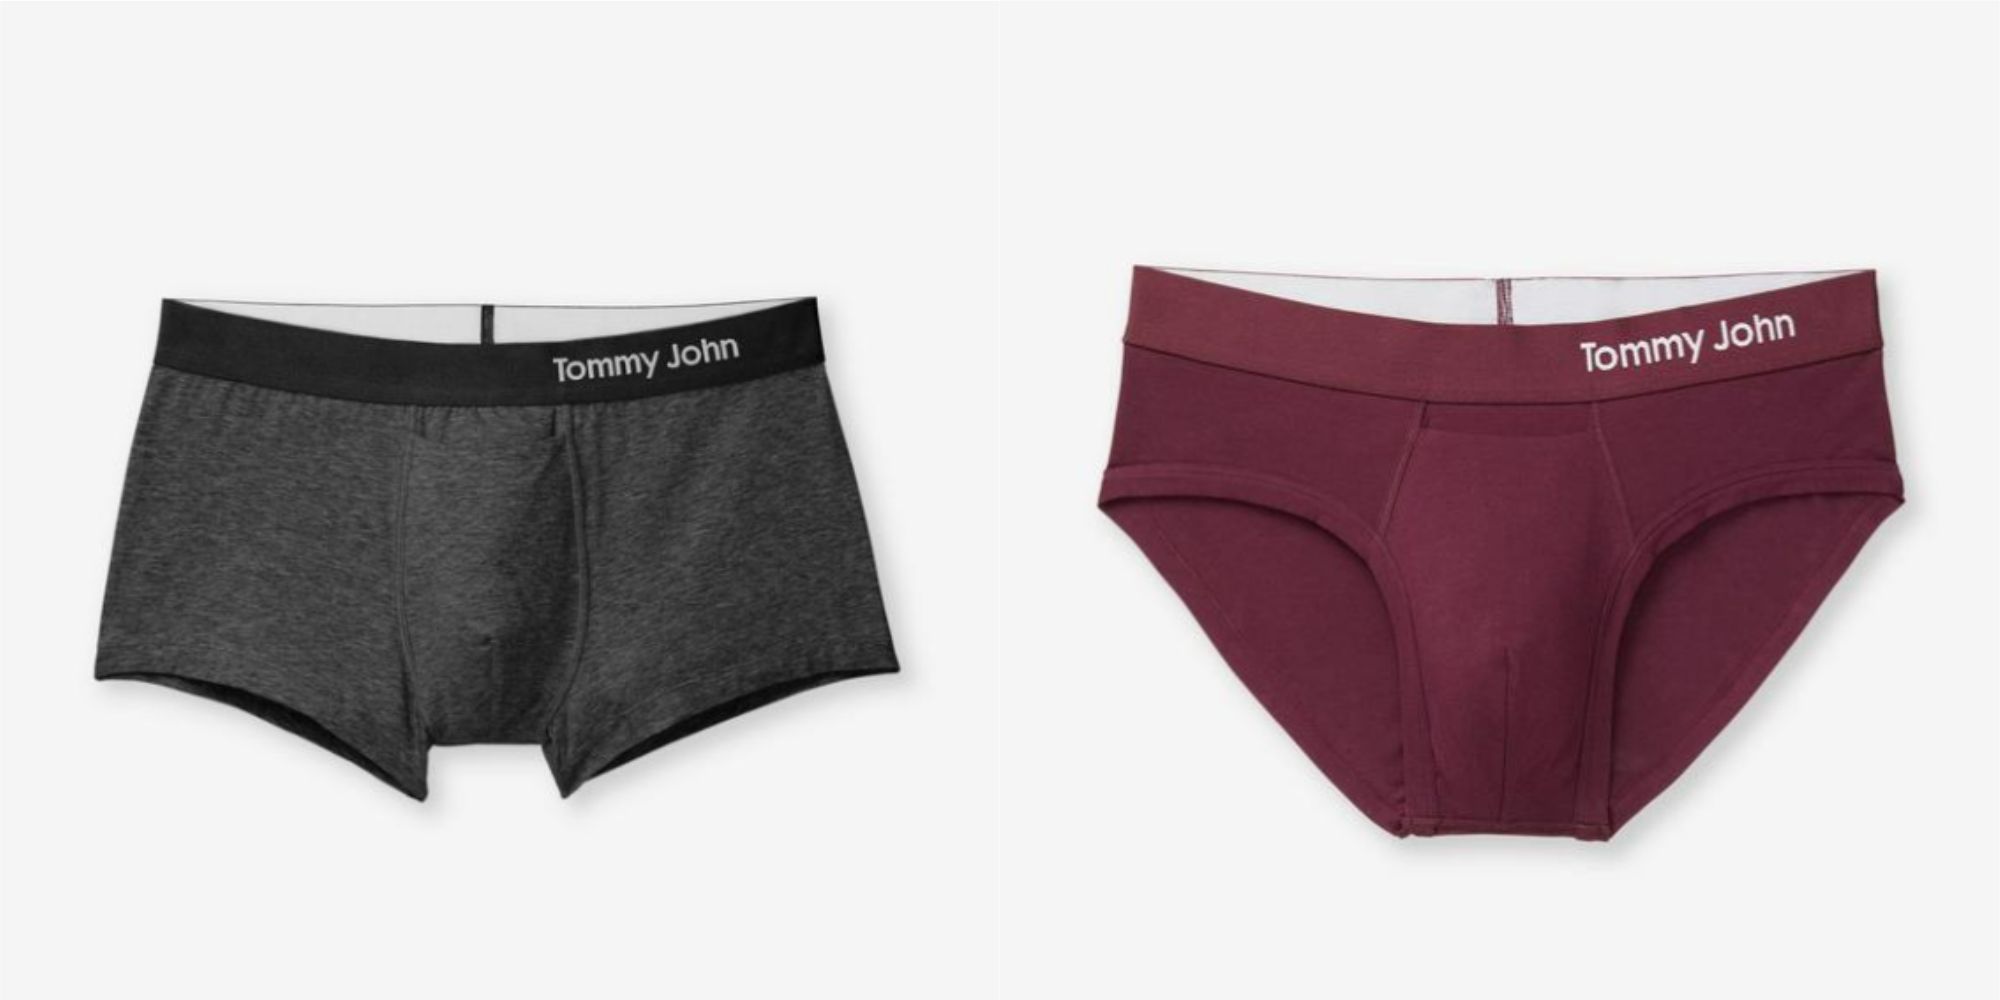 This Tommy John Men's Underwear Discount Saves You Money